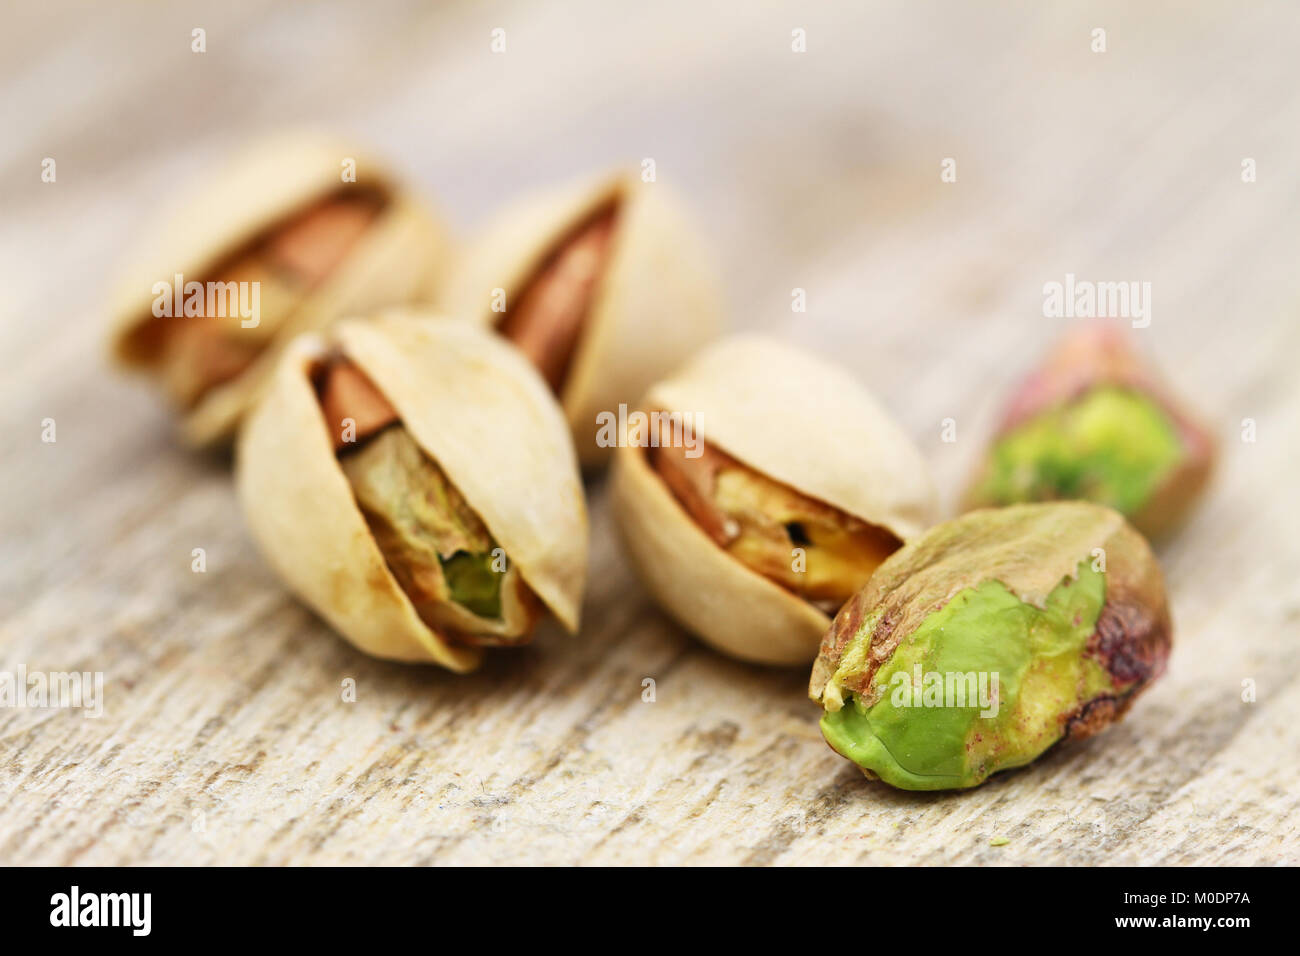 Close up of few pistachio nuts on rustic wooden surface Stock Photo